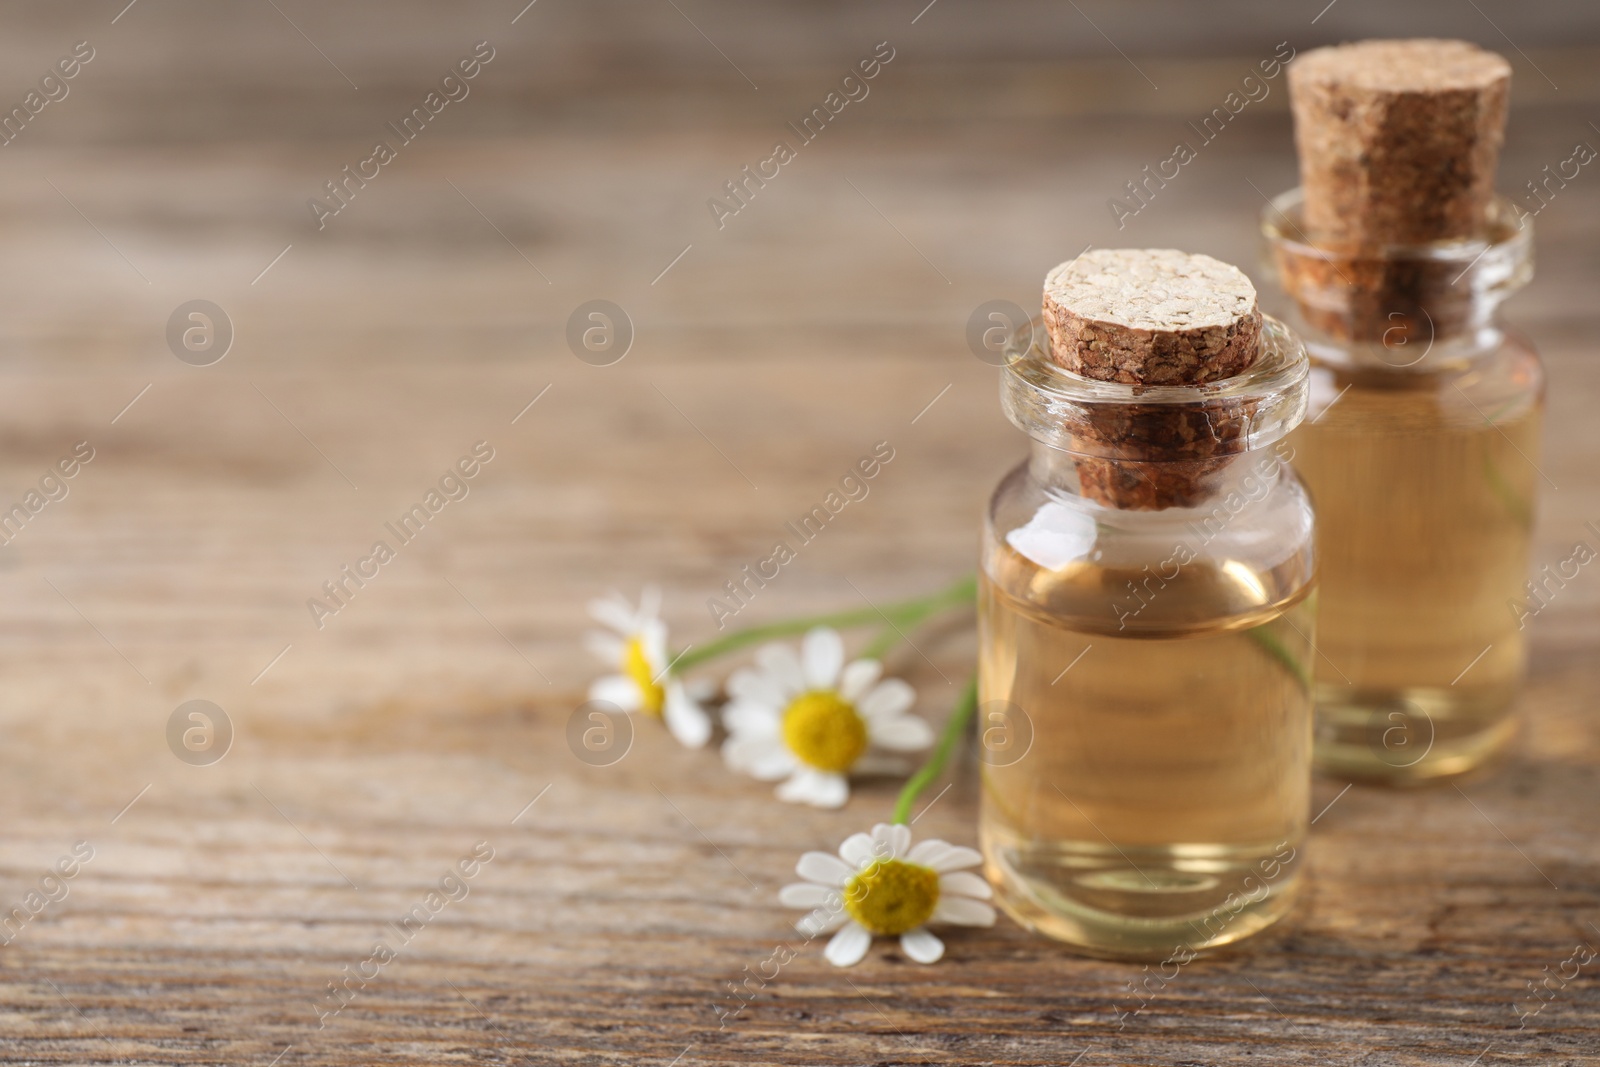 Photo of Chamomile flowers and bottles of essential oil on wooden table, space for text